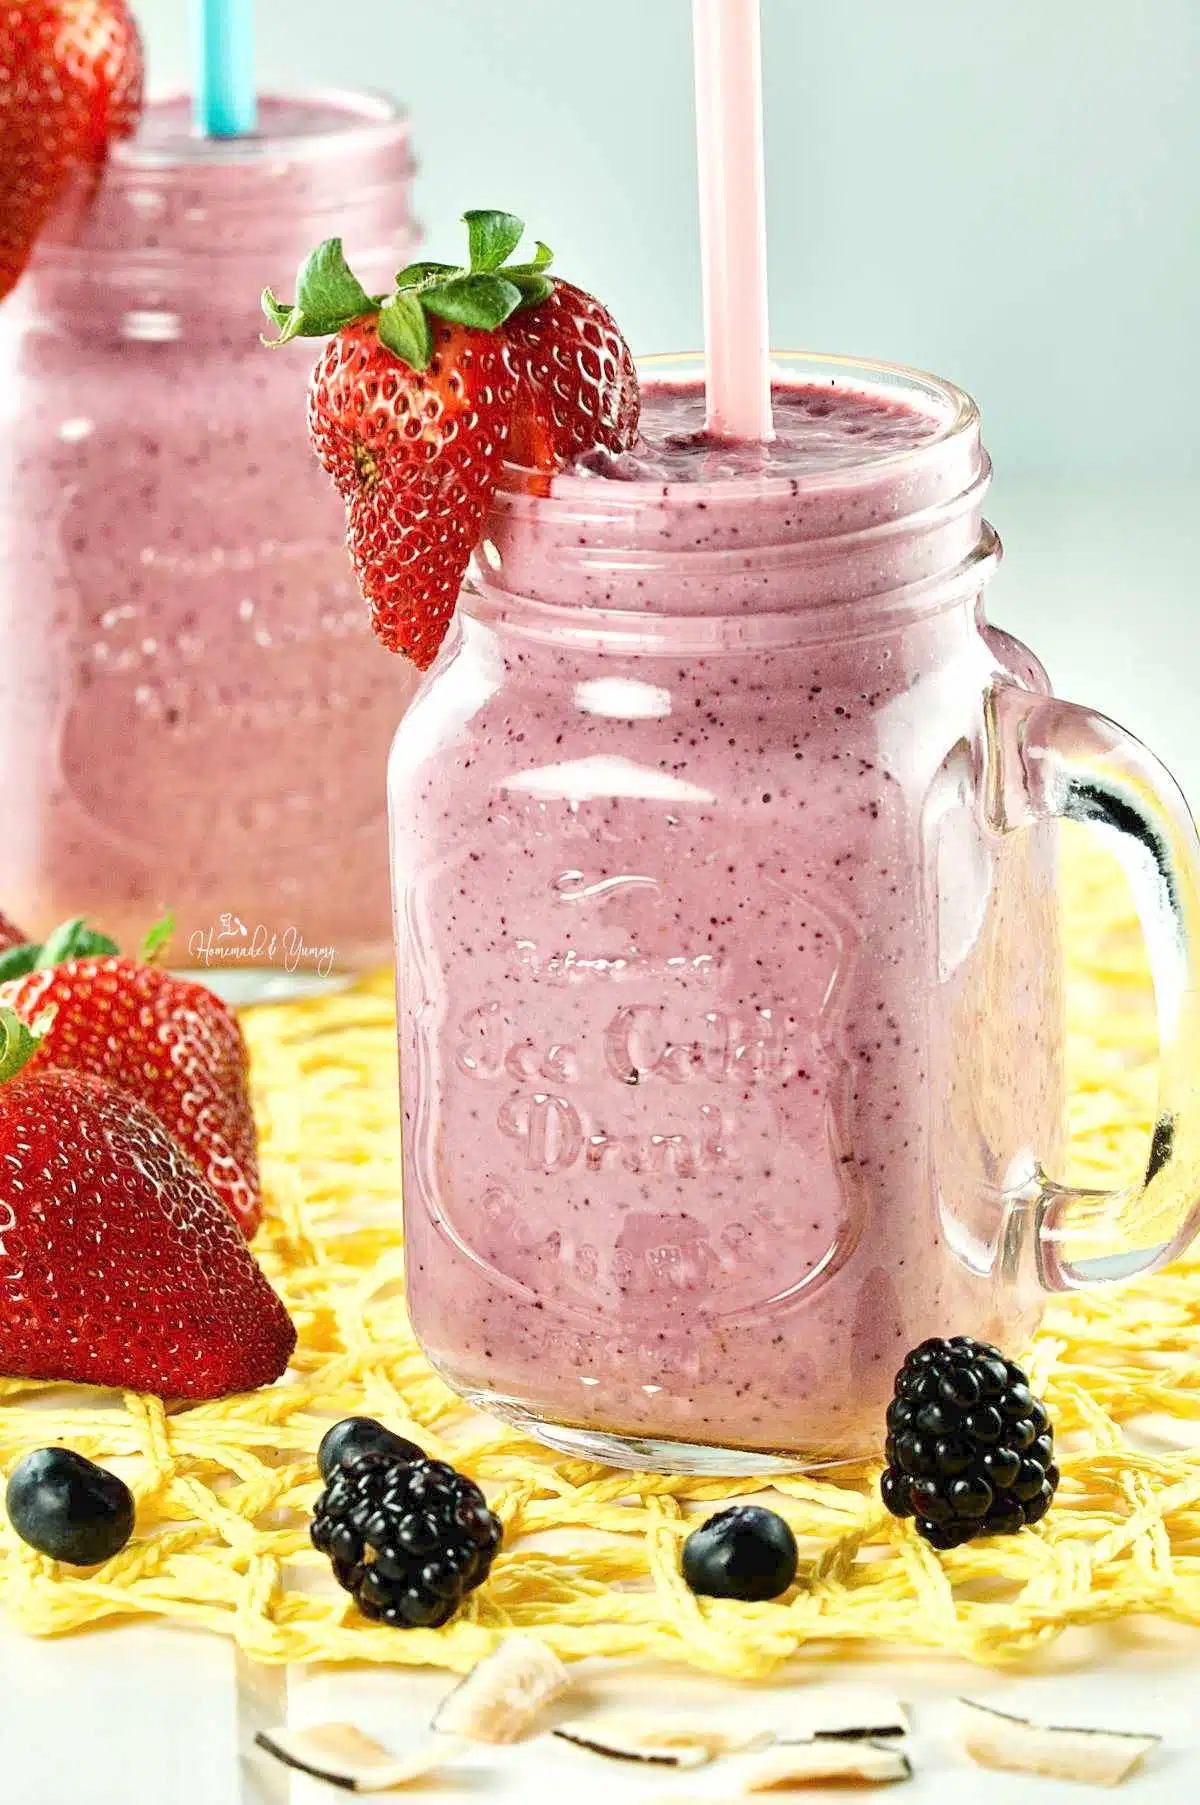 Triple Berry Smoothie is nutritious and so easy to blend up.